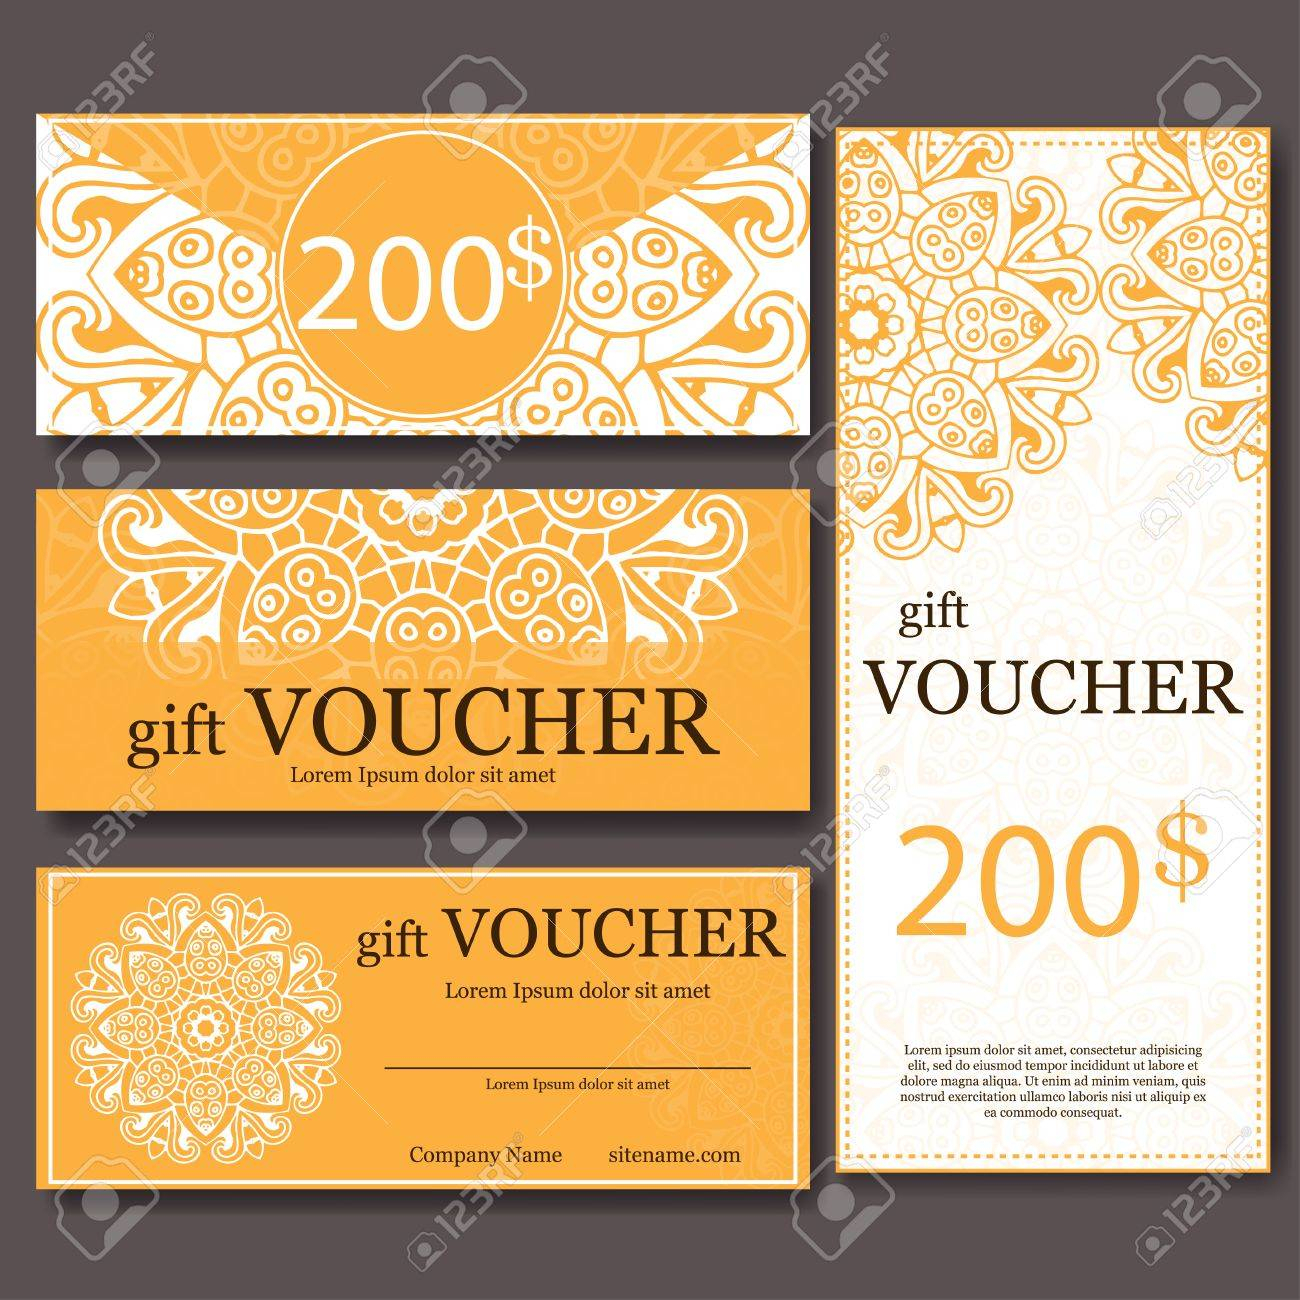 Gift Voucher Template With Mandala. Design Certificate For Sport.. With Magazine Subscription Gift Certificate Template